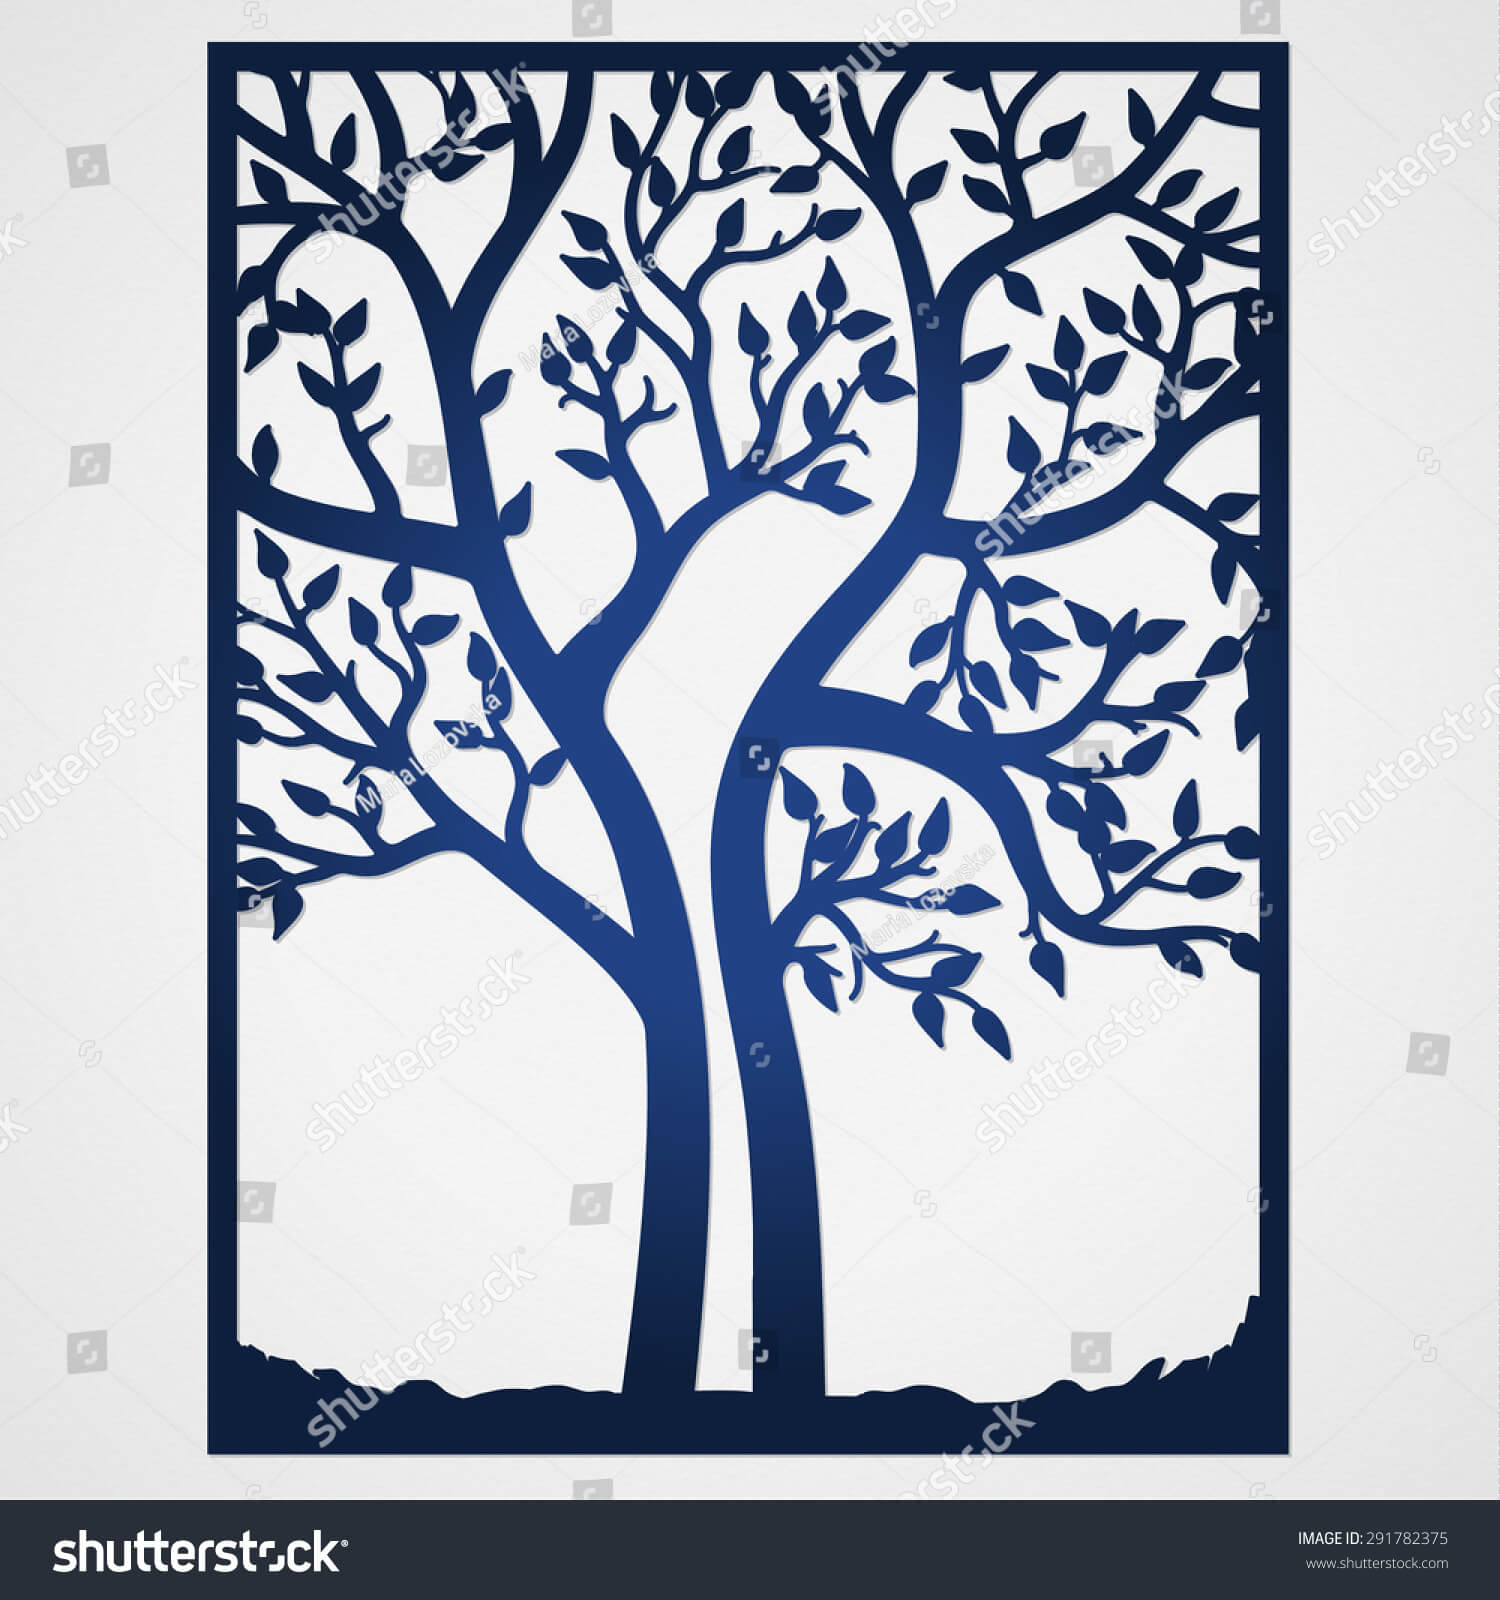 Abstract Frame Tree May Be Used Stock Image | Download Now For Silhouette Cameo Card Templates